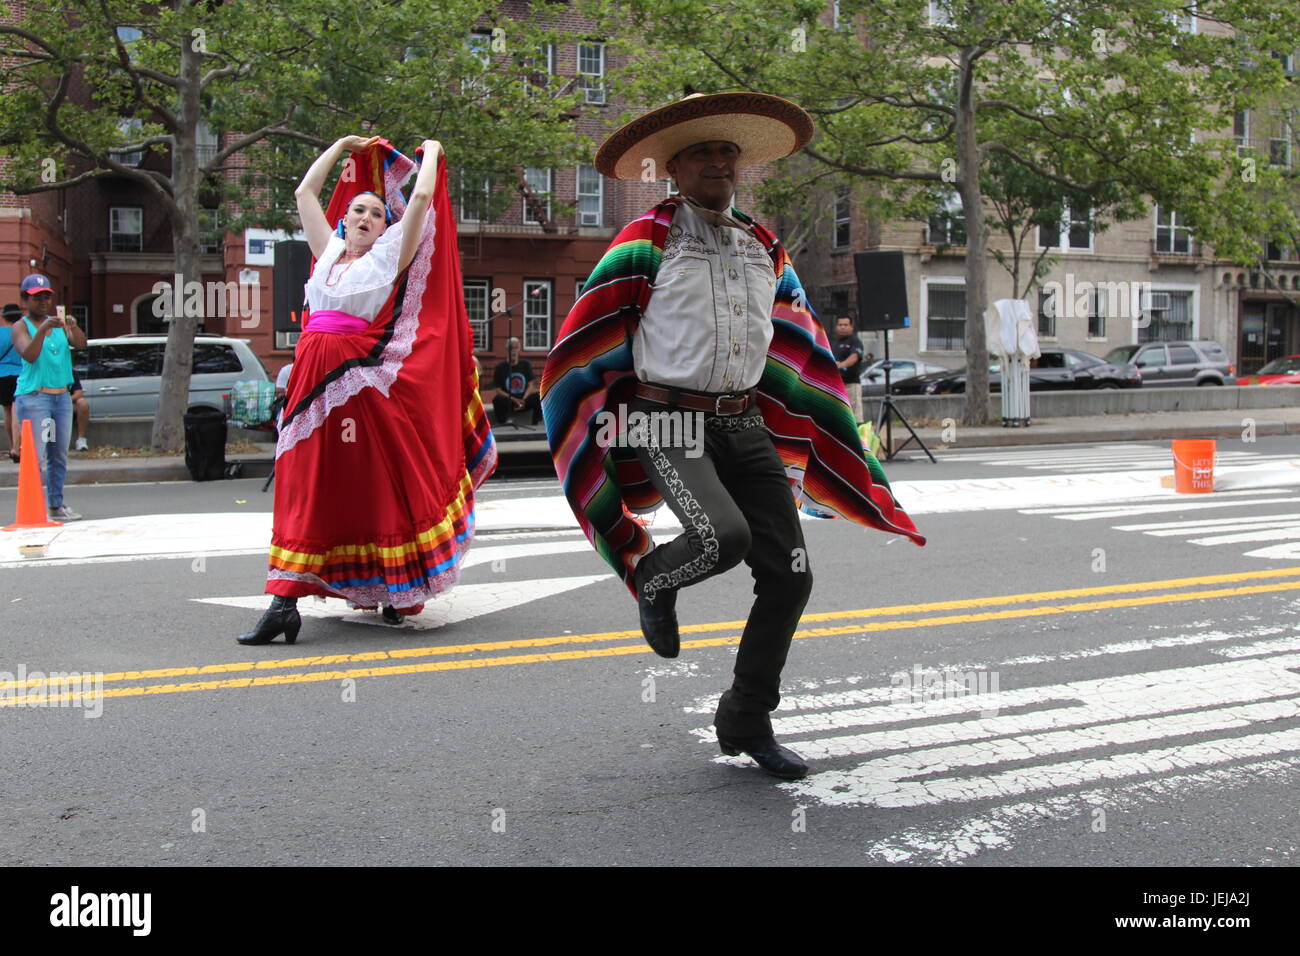 New York, USA. 25th June, 2017. The Mexican dance group 'Mazarte' performs for the public at the Boogie on the Boulevard event on the Grand Concord Boulevard in the Bronx. The center lanes of the normally busy Grand Concourse roadway from 162nd Street to 170th Street is closed to cars and open to a world of fun with free music, art and fitness programs hosted by organizations from the Bronx and beyond . Credit:  G. Ronald Lopez /DigiPixsAgain.us/Alamy Live News Stock Photo